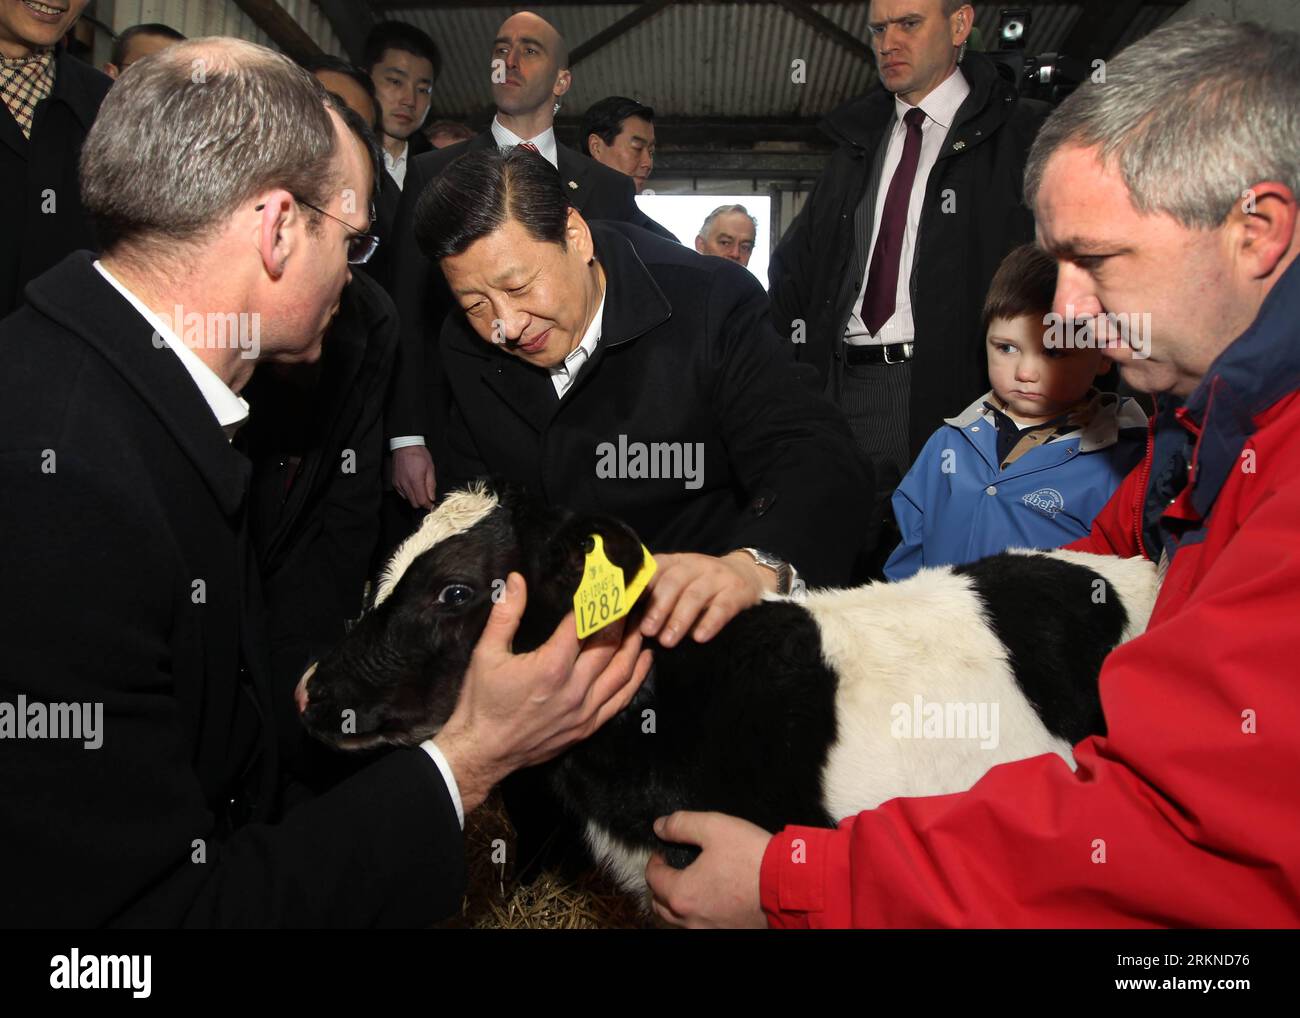 Bildnummer: 57090788  Datum: 19.02.2012  Copyright: imago/Xinhua (120219) -- SHANNON, Feb. 19, 2012 (Xinhua) -- Chinese Vice President Xi Jinping (2nd L, front) and Irish Agriculture, Food and Marine Minister Simon Coveney (1st L, front) view a calf at a farm in Shannon, Ireland, Feb. 19, 2012. Xi Jinping visited James Lynch s farm in a suburb of Shannon on Sunday. (Xinhua/Lan Hongguang) (zkr) IRELAND-CHINA-XI JINPING-FARM-VISIT PUBLICATIONxNOTxINxCHN People Politik xbs x0x 2012 quer premiumd      57090788 Date 19 02 2012 Copyright Imago XINHUA  Shannon Feb 19 2012 XINHUA  Vice President Xi J Stock Photo